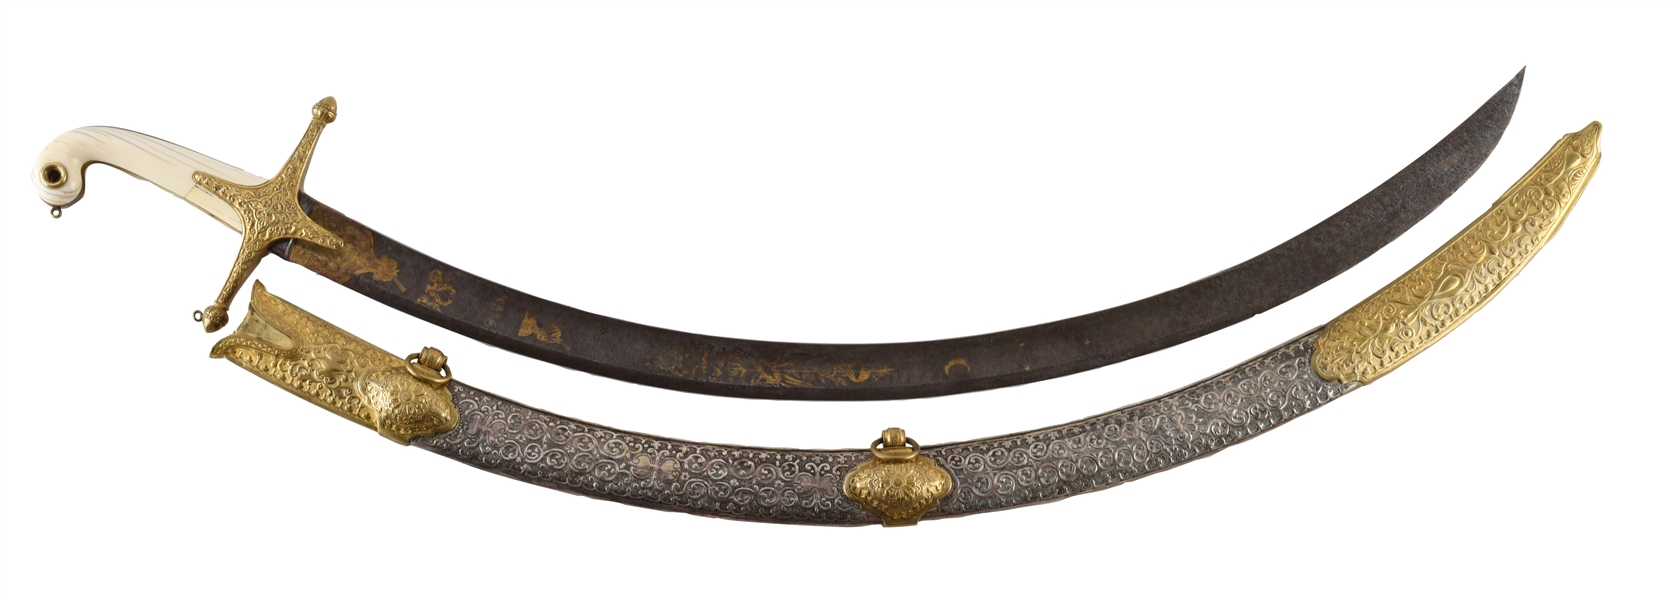 MAGNIFICENT SILVER GILT BRASS & IVORY MOUNTED HUNGARIAN MAMLUK HILT SABER WITH GILT DECORATED ETCHED BLADE.